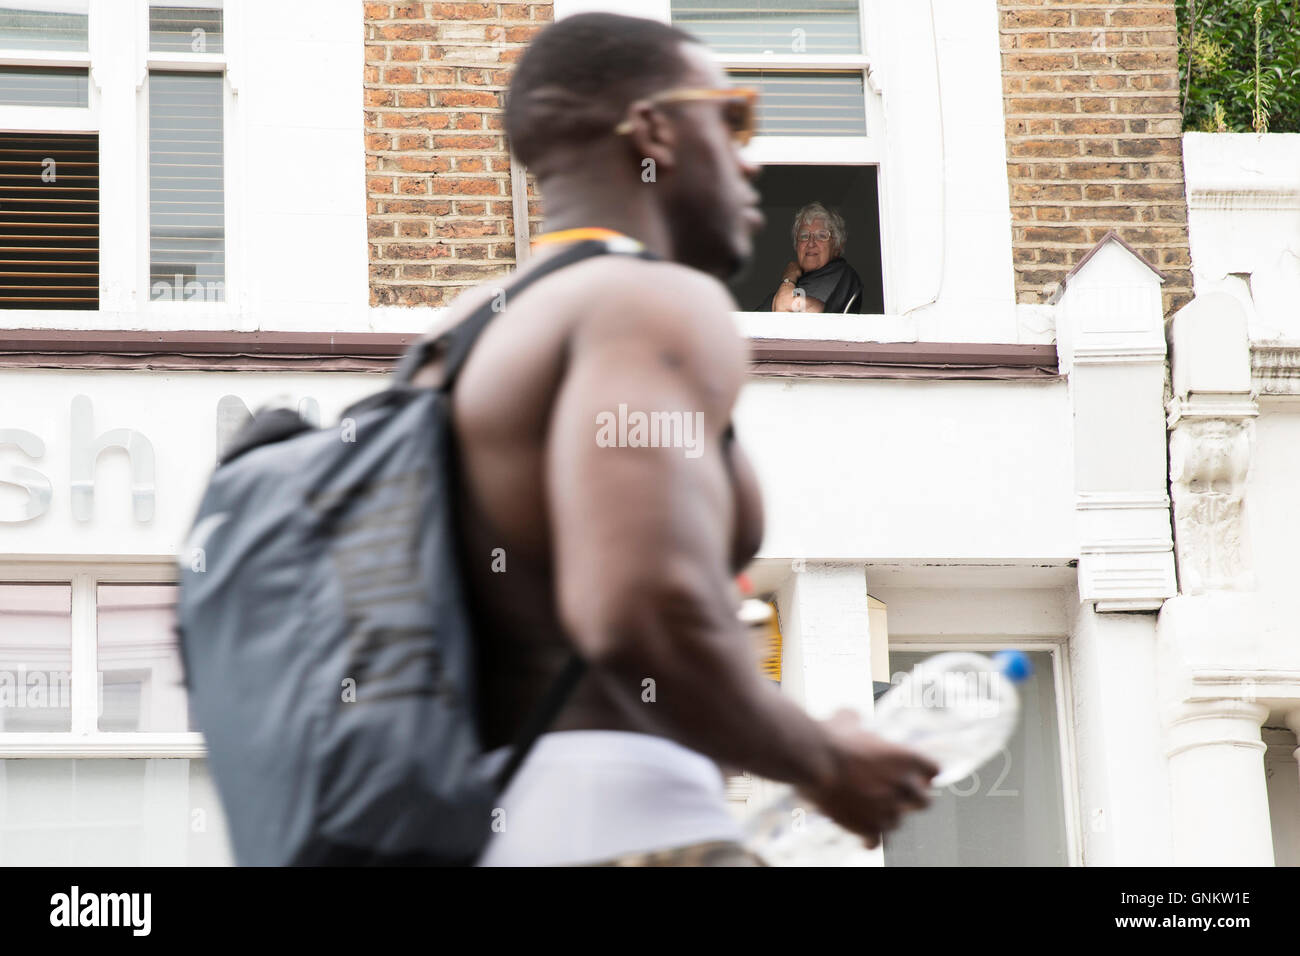 Residents watching revellers at Notting Hill Carnival in London Stock Photo